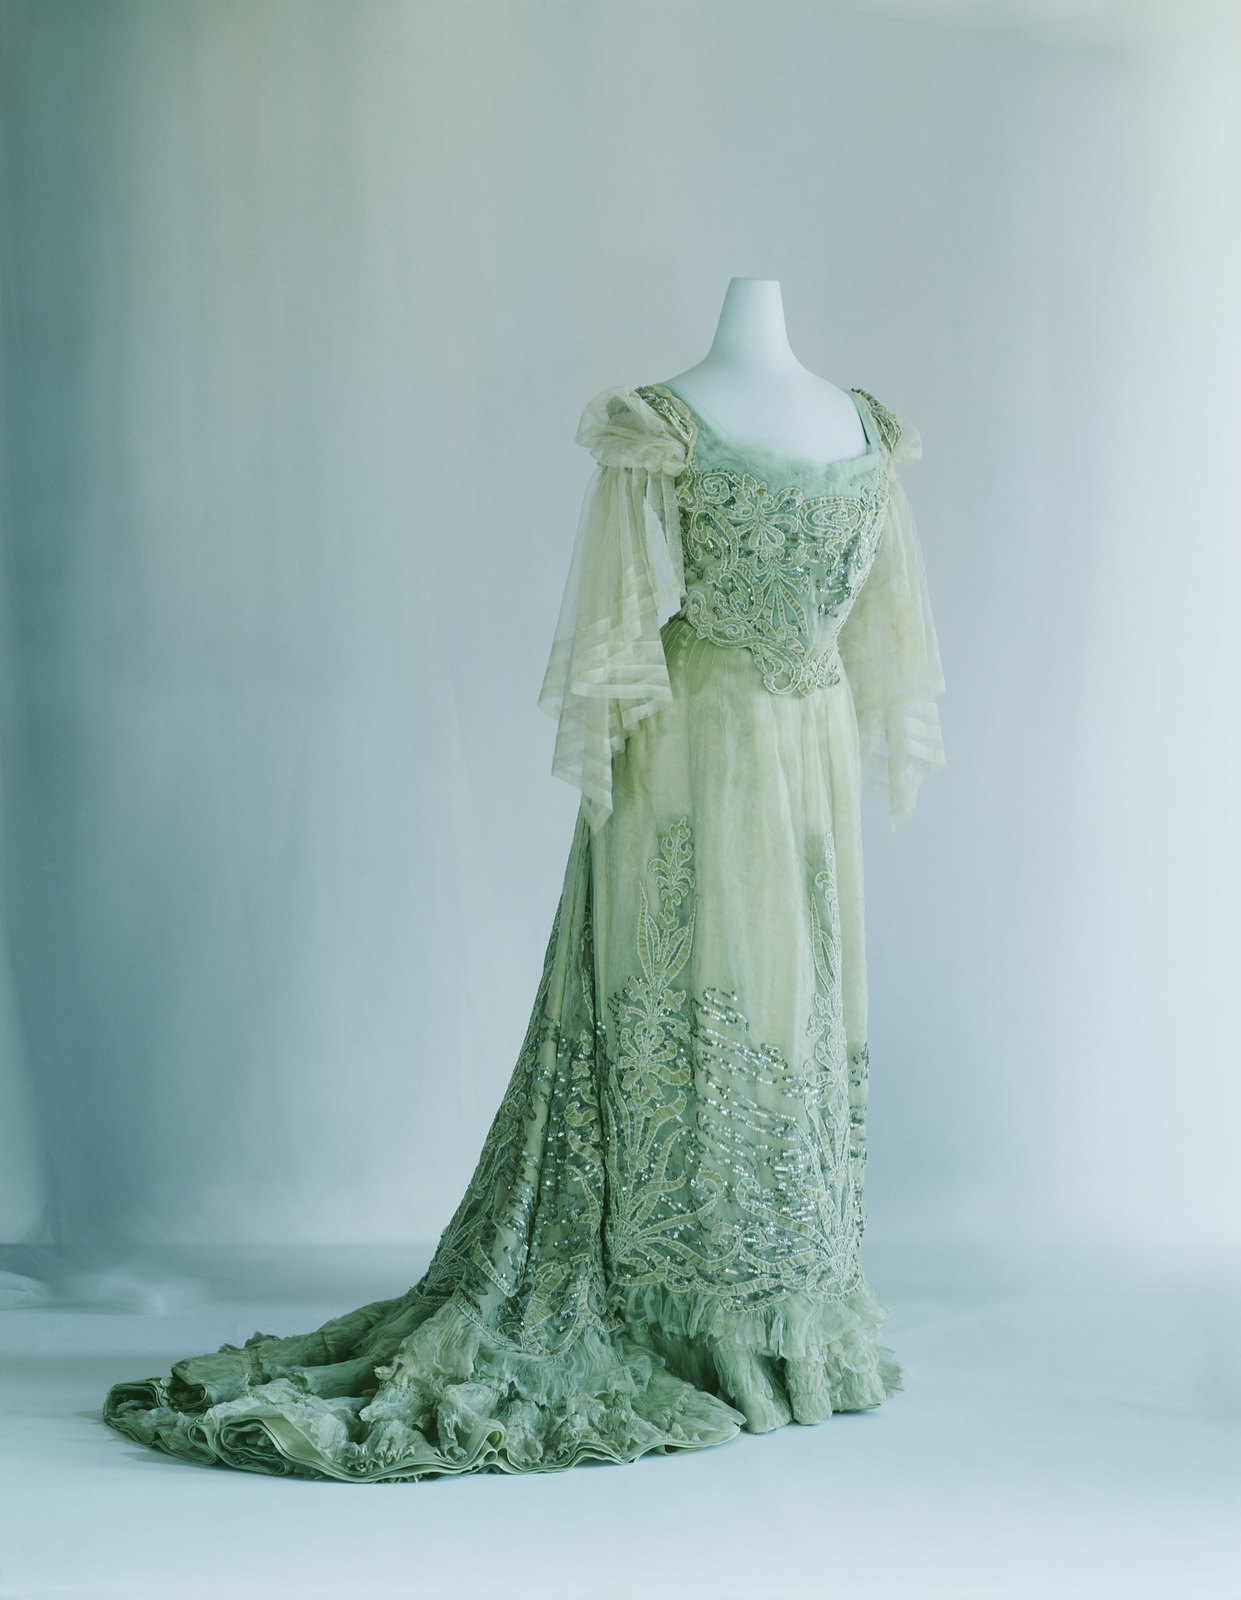 1900. Evening Dress. Pale green silk chiffon and velvet; S-curve silhouette; appliqué of plant pattern; sequin and cord embroidery with water's-edge pattern. Credit KCI